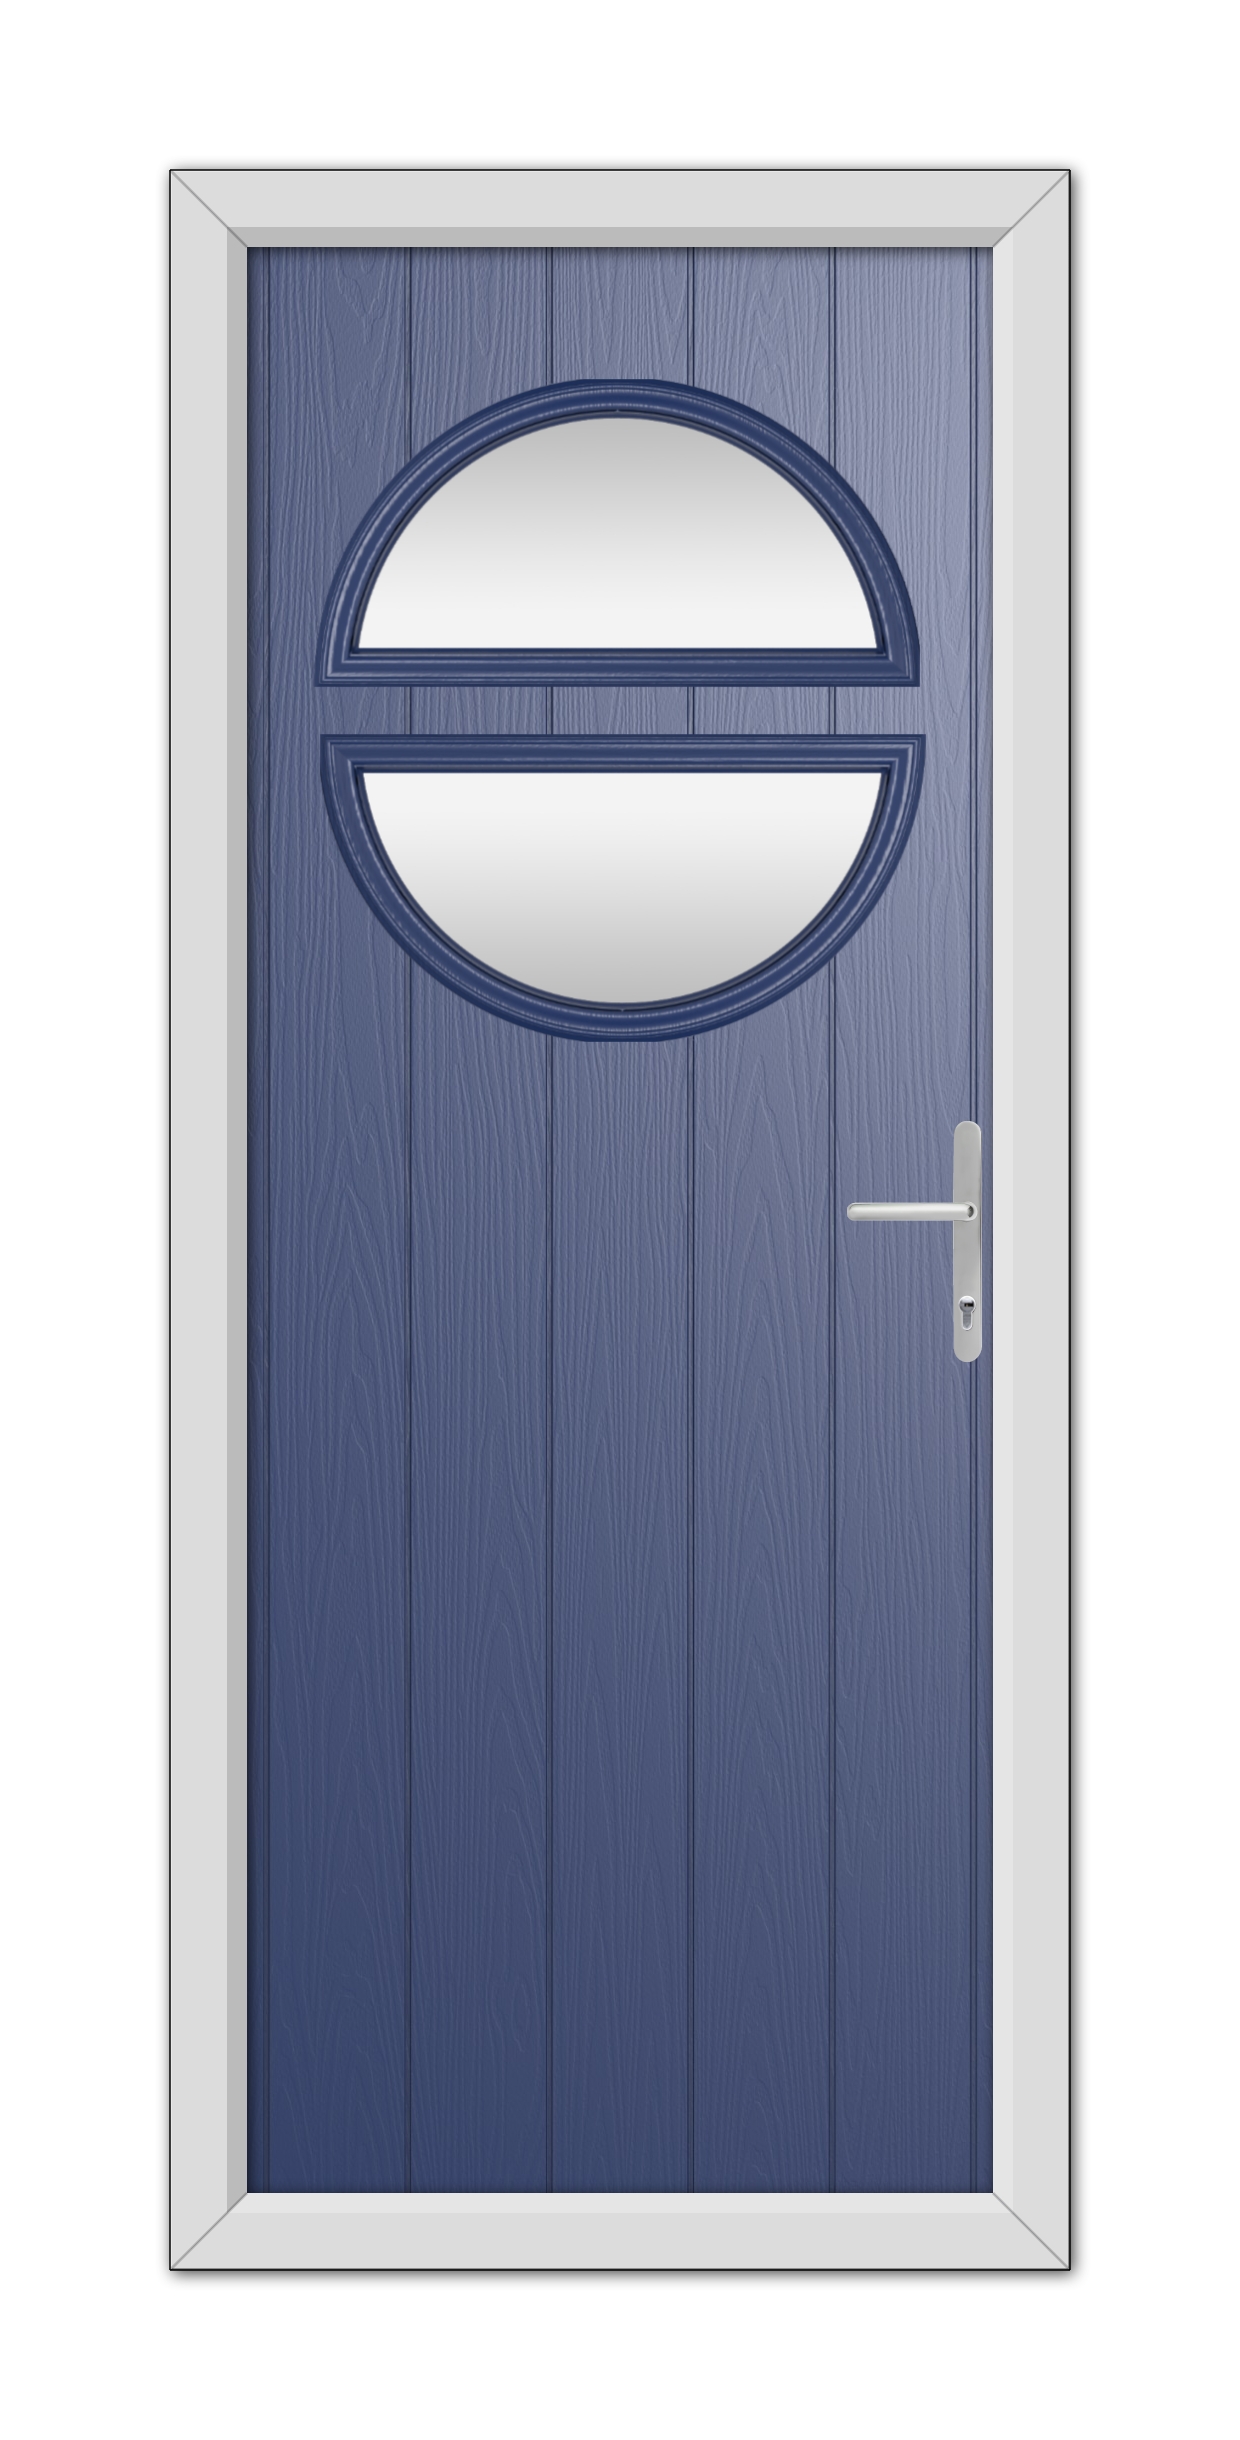 A Blue Kent Composite Door 48mm Timber Core with an oval glass window and a silver handle, set in a white frame.